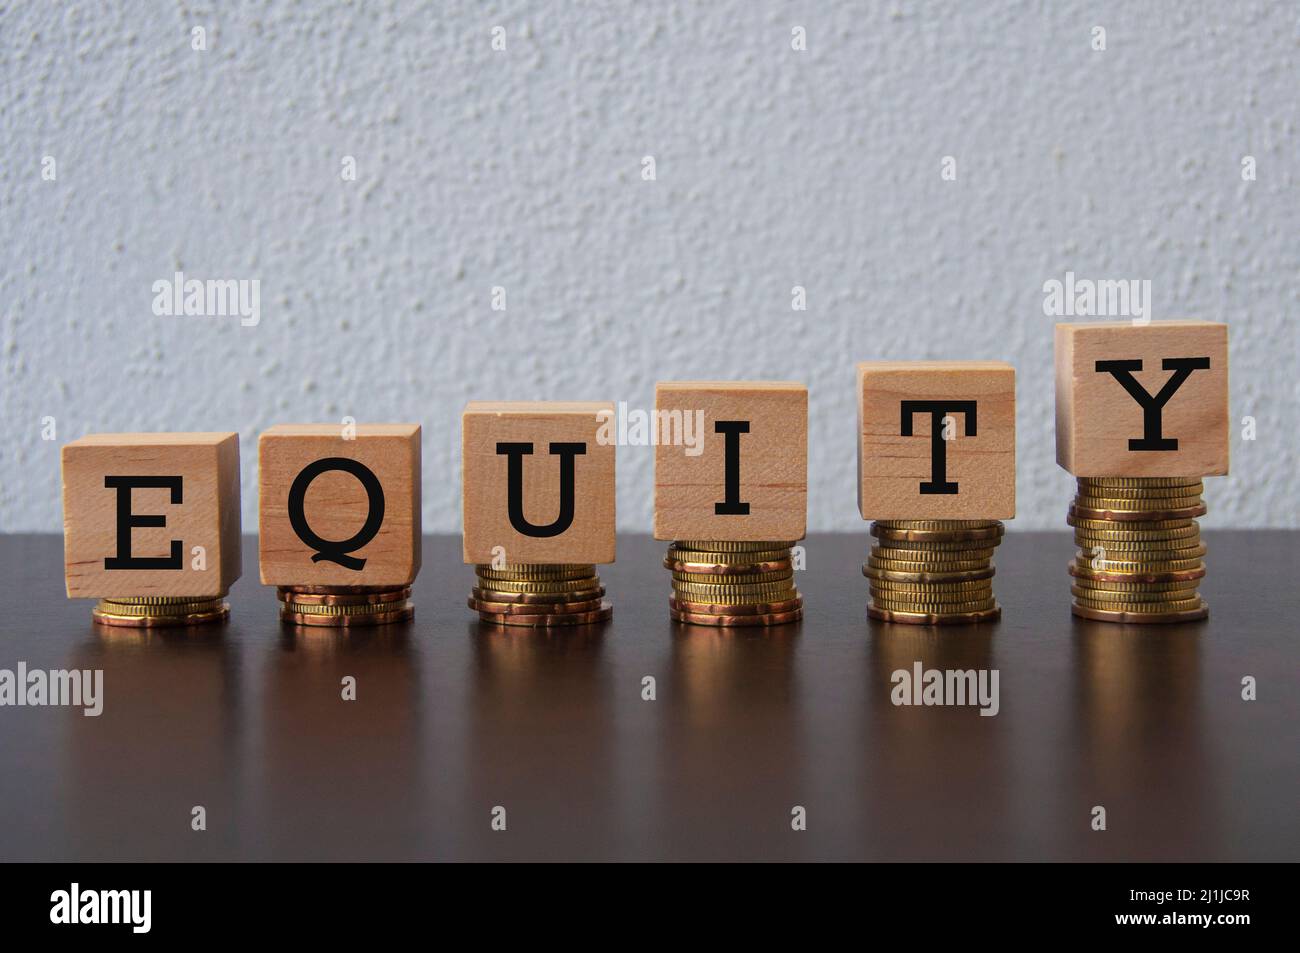 Coins Stack with Equity text on wooden blocks - Business and Financial Concept Stock Photo